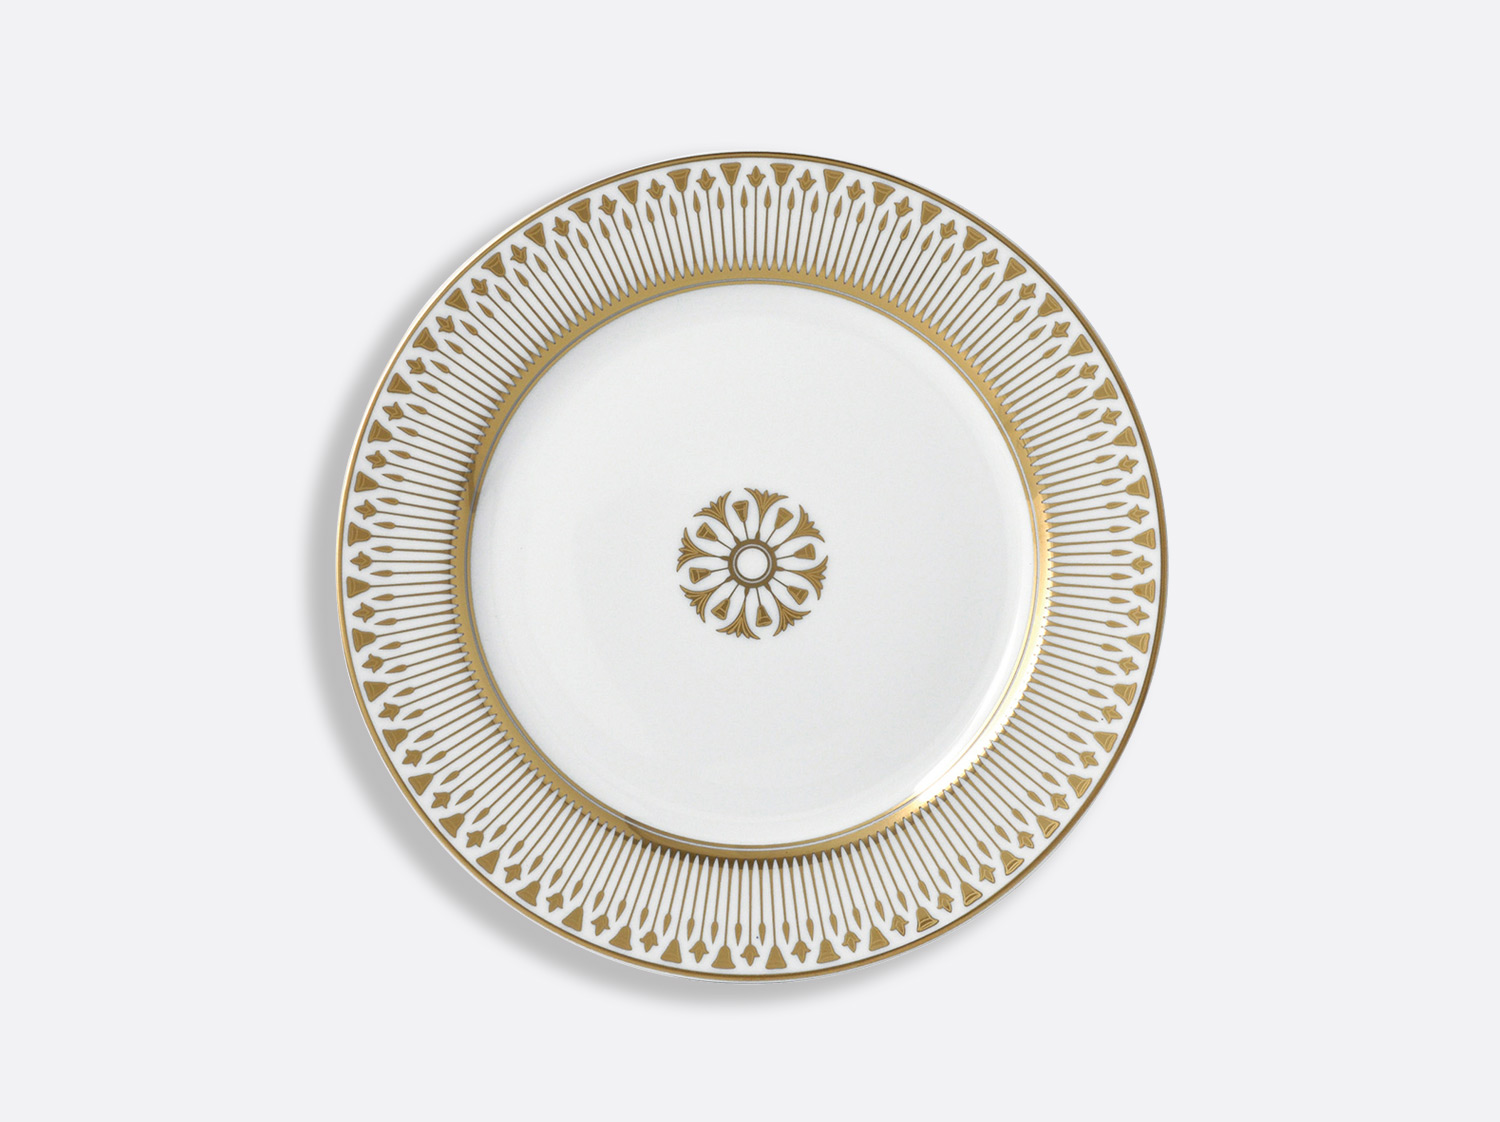 China Salad plate 8.5" of the collection Soleil levant | Bernardaud